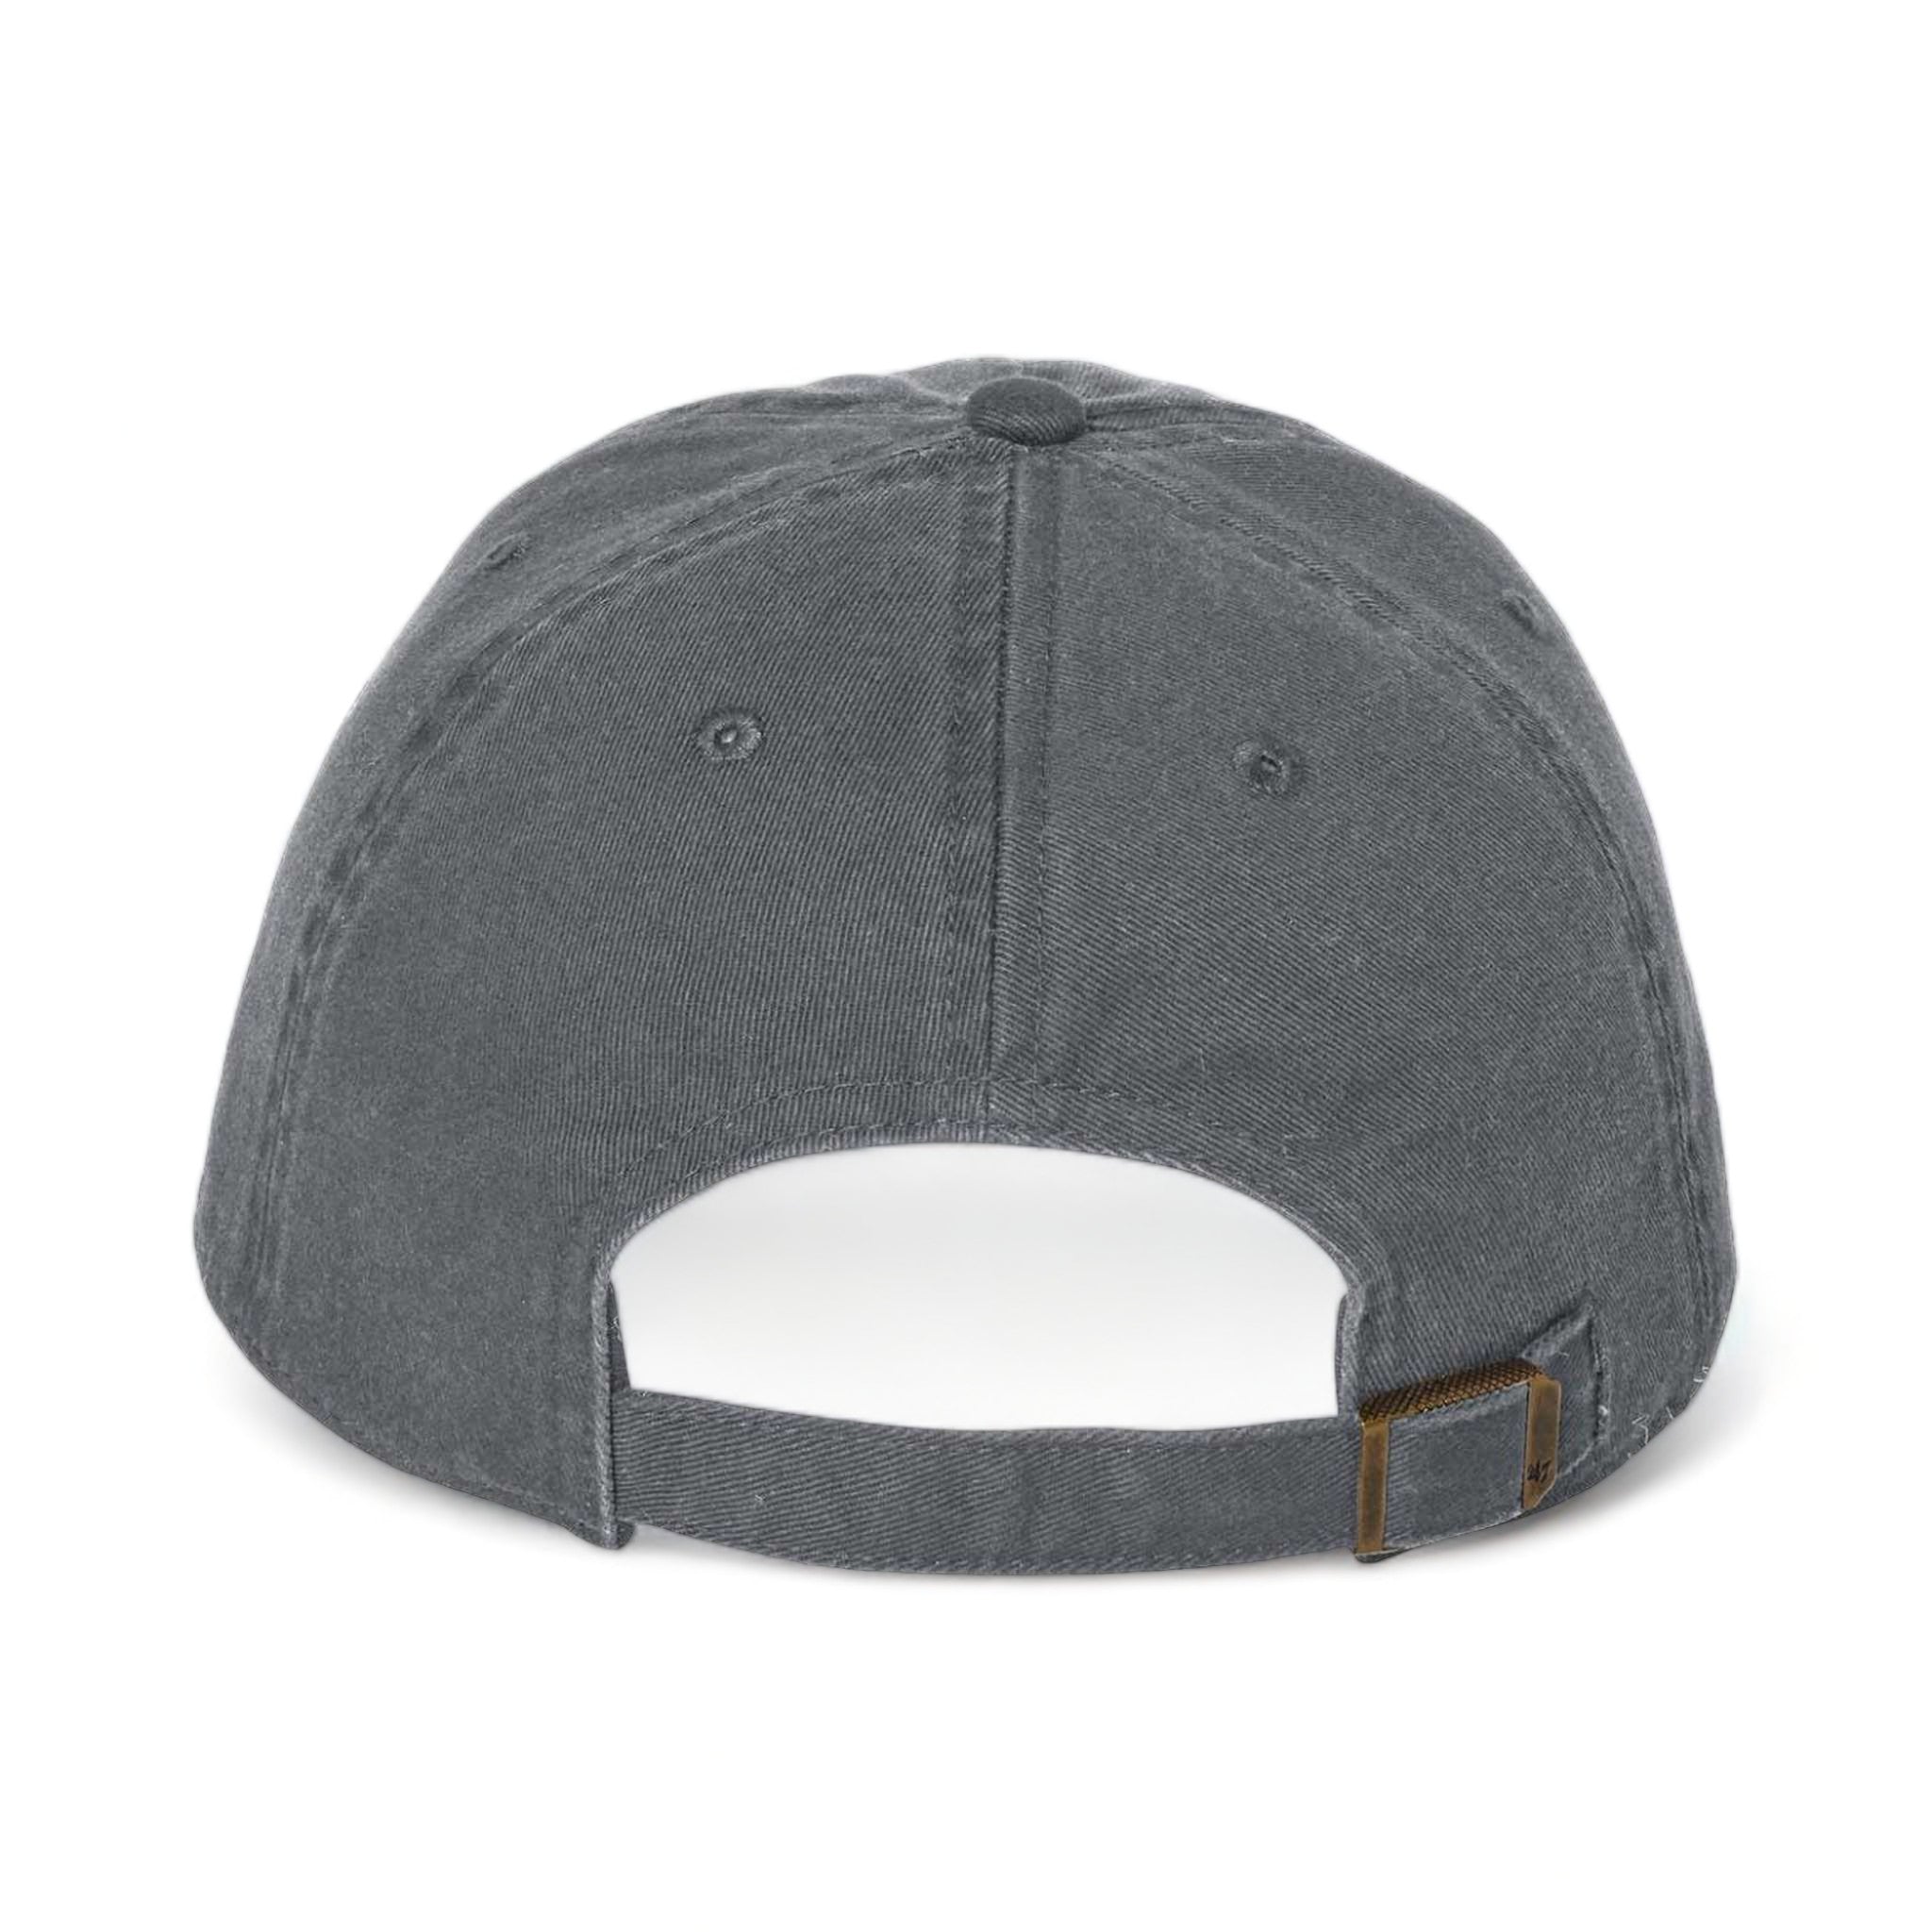 Back view of 47 Brand 4700 custom hat in charcoal